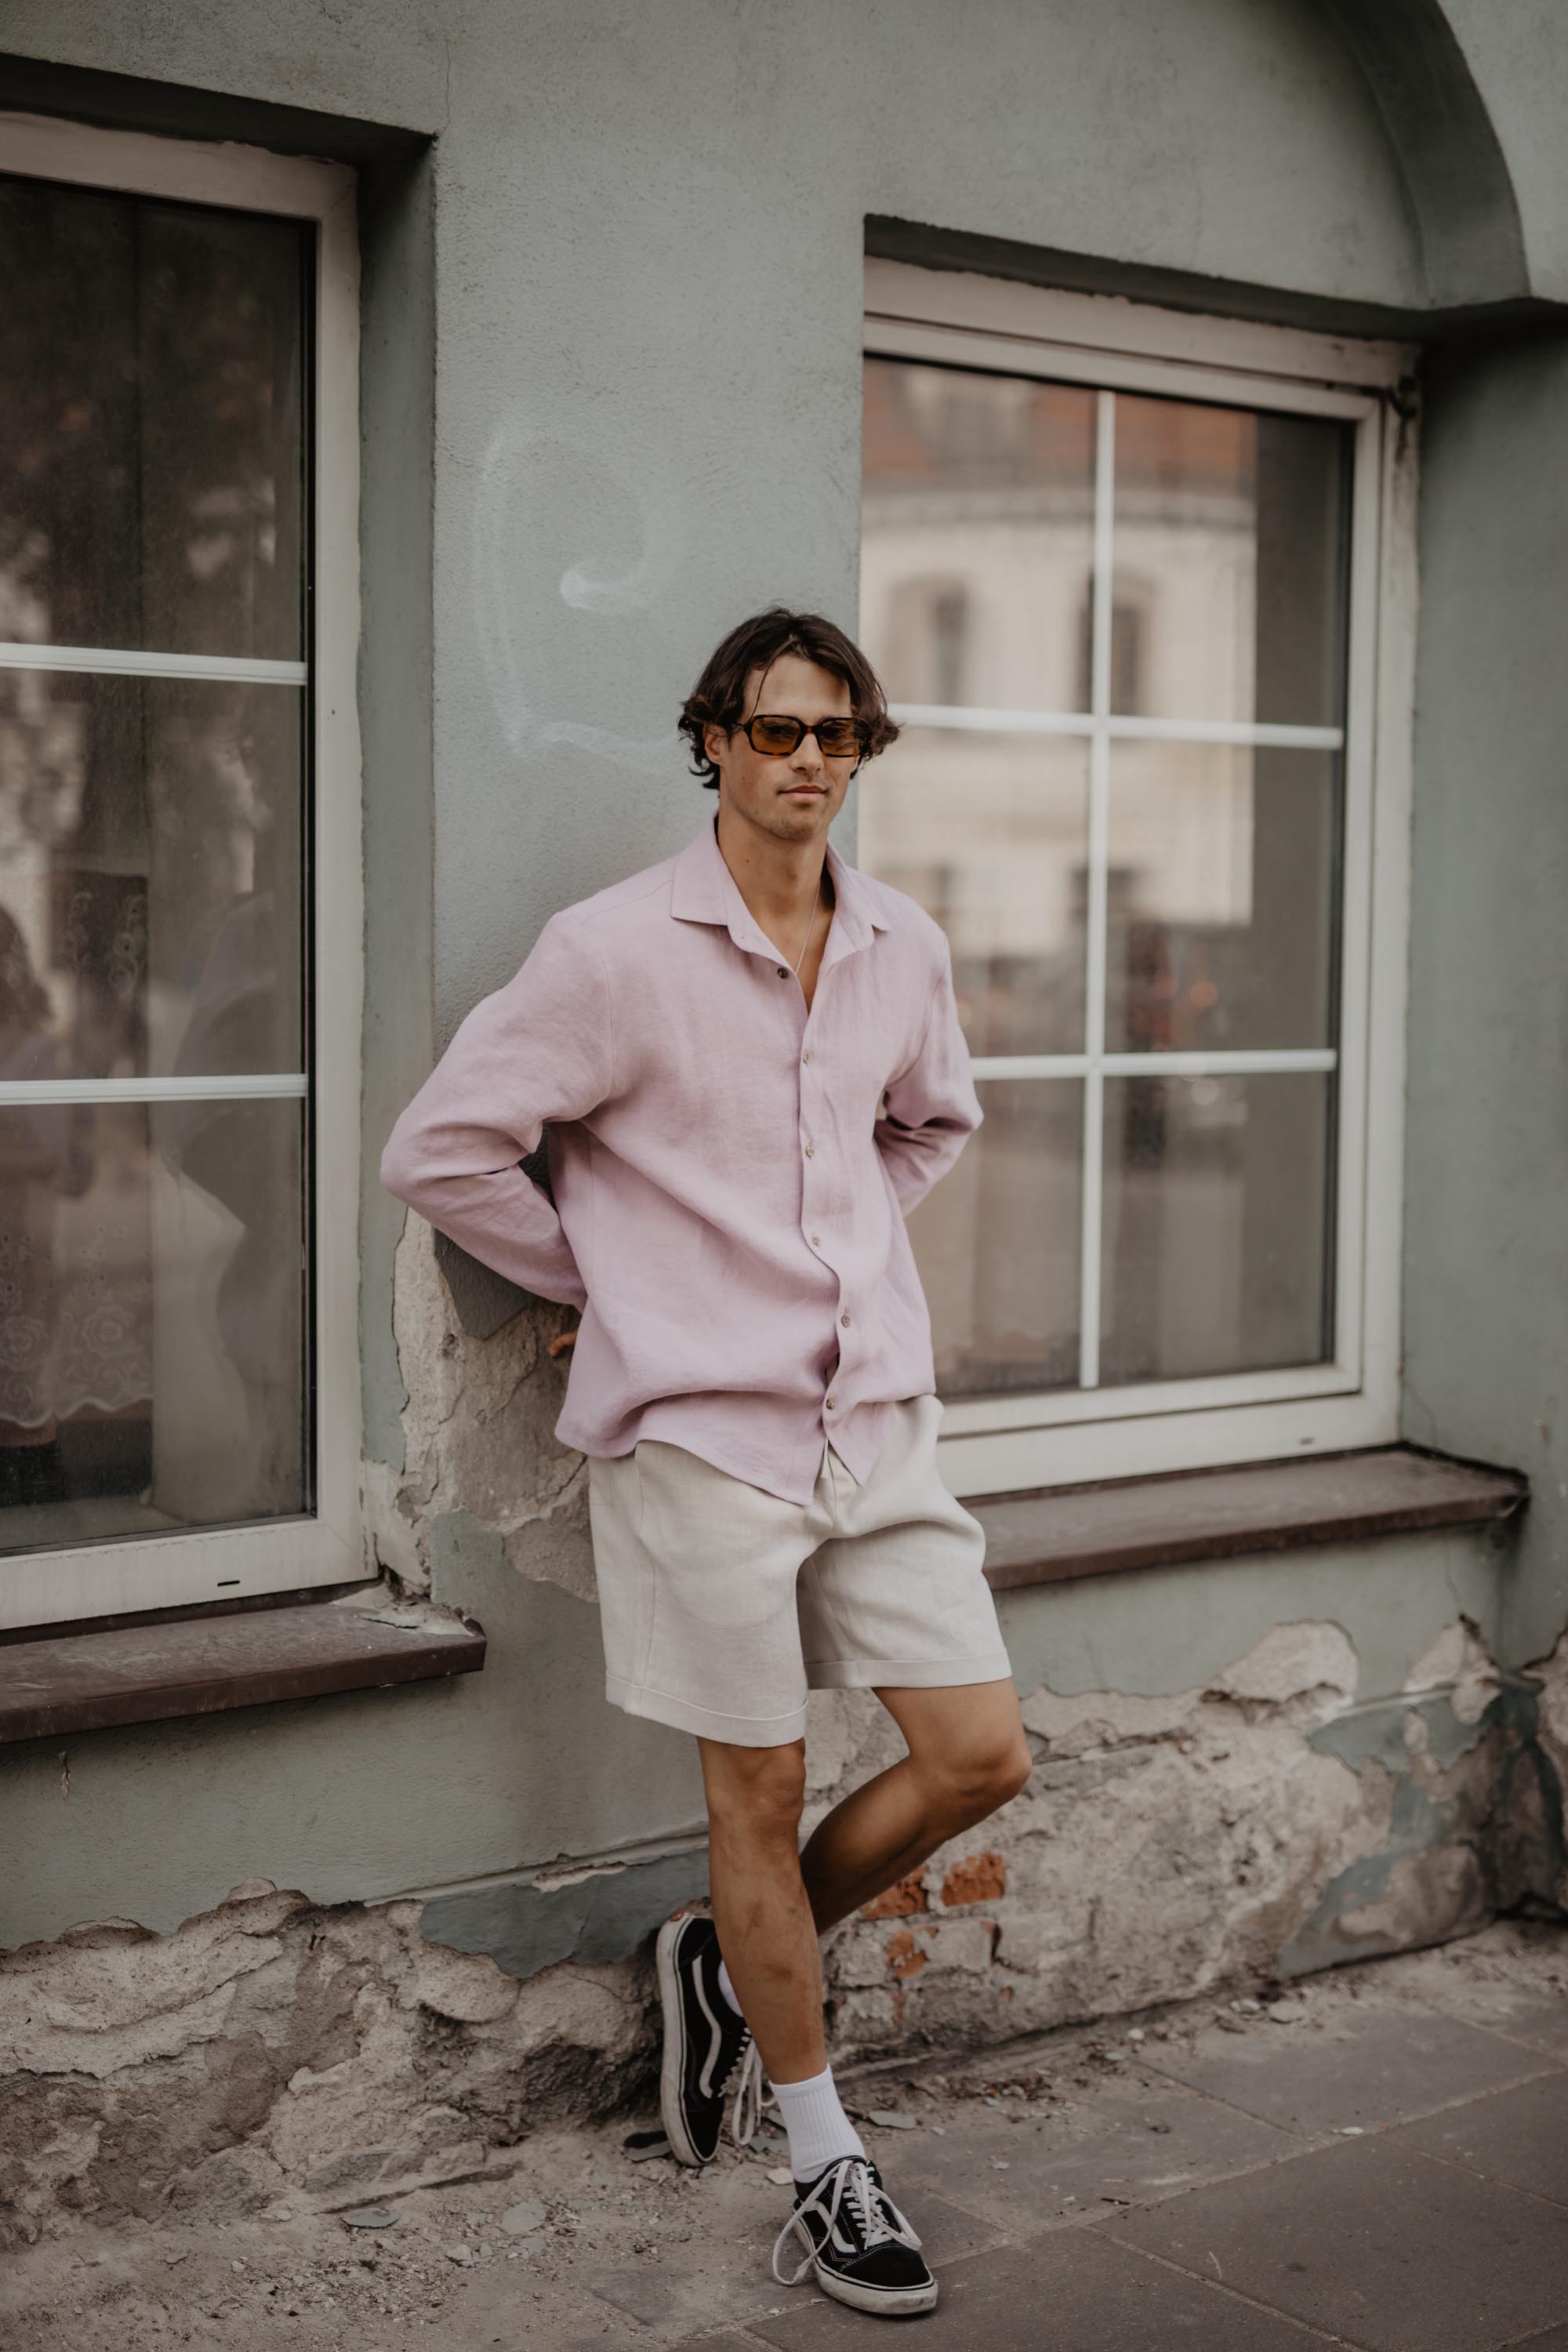 Man Wearing Cotton Candy Color Classic Linen Shirt Leaning On A Wall